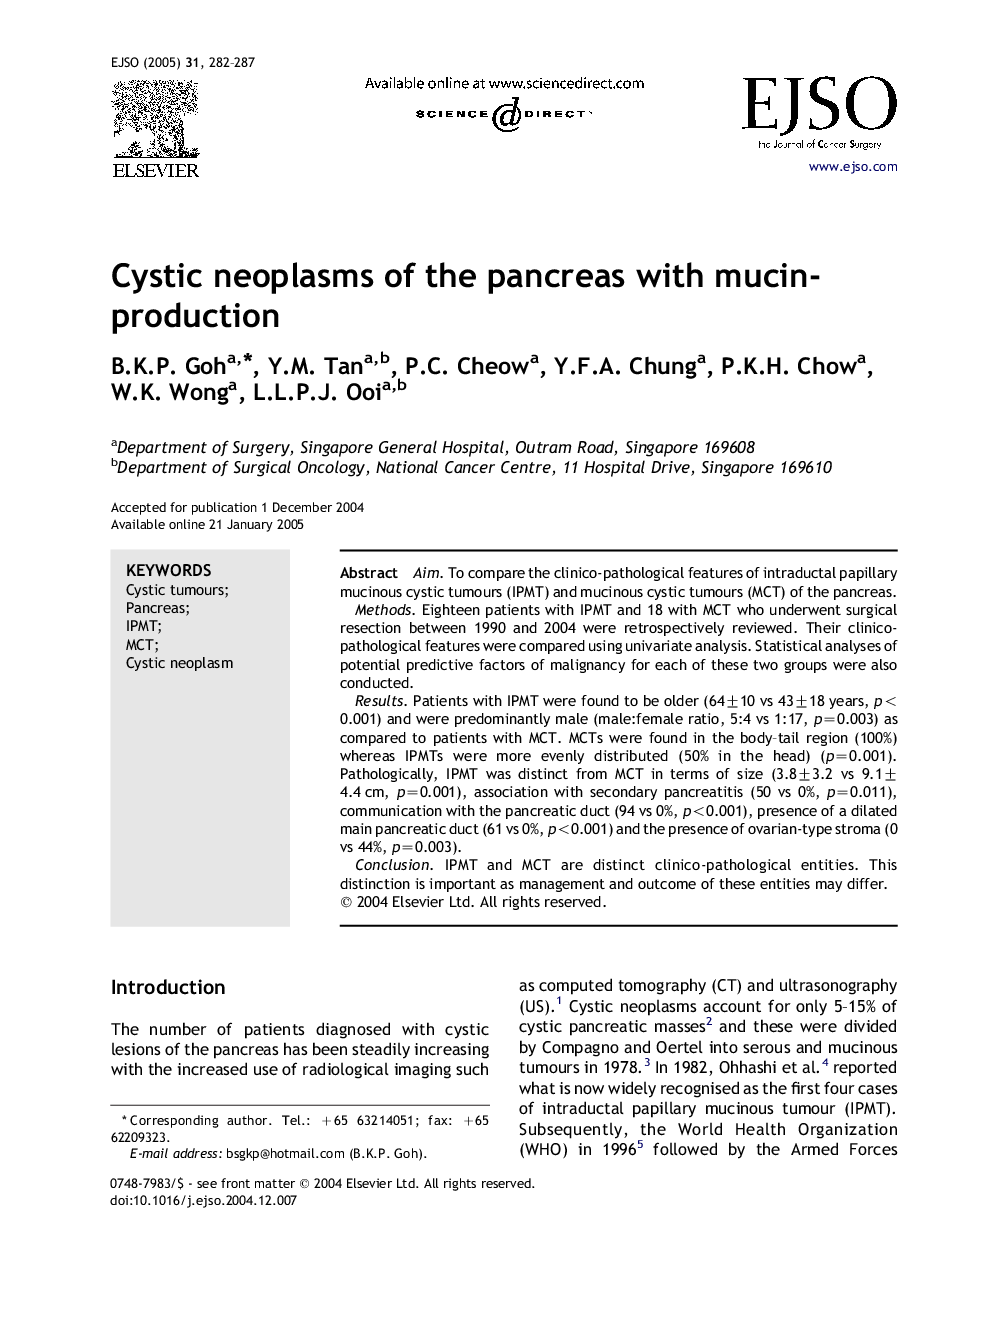 Cystic neoplasms of the pancreas with mucin-production